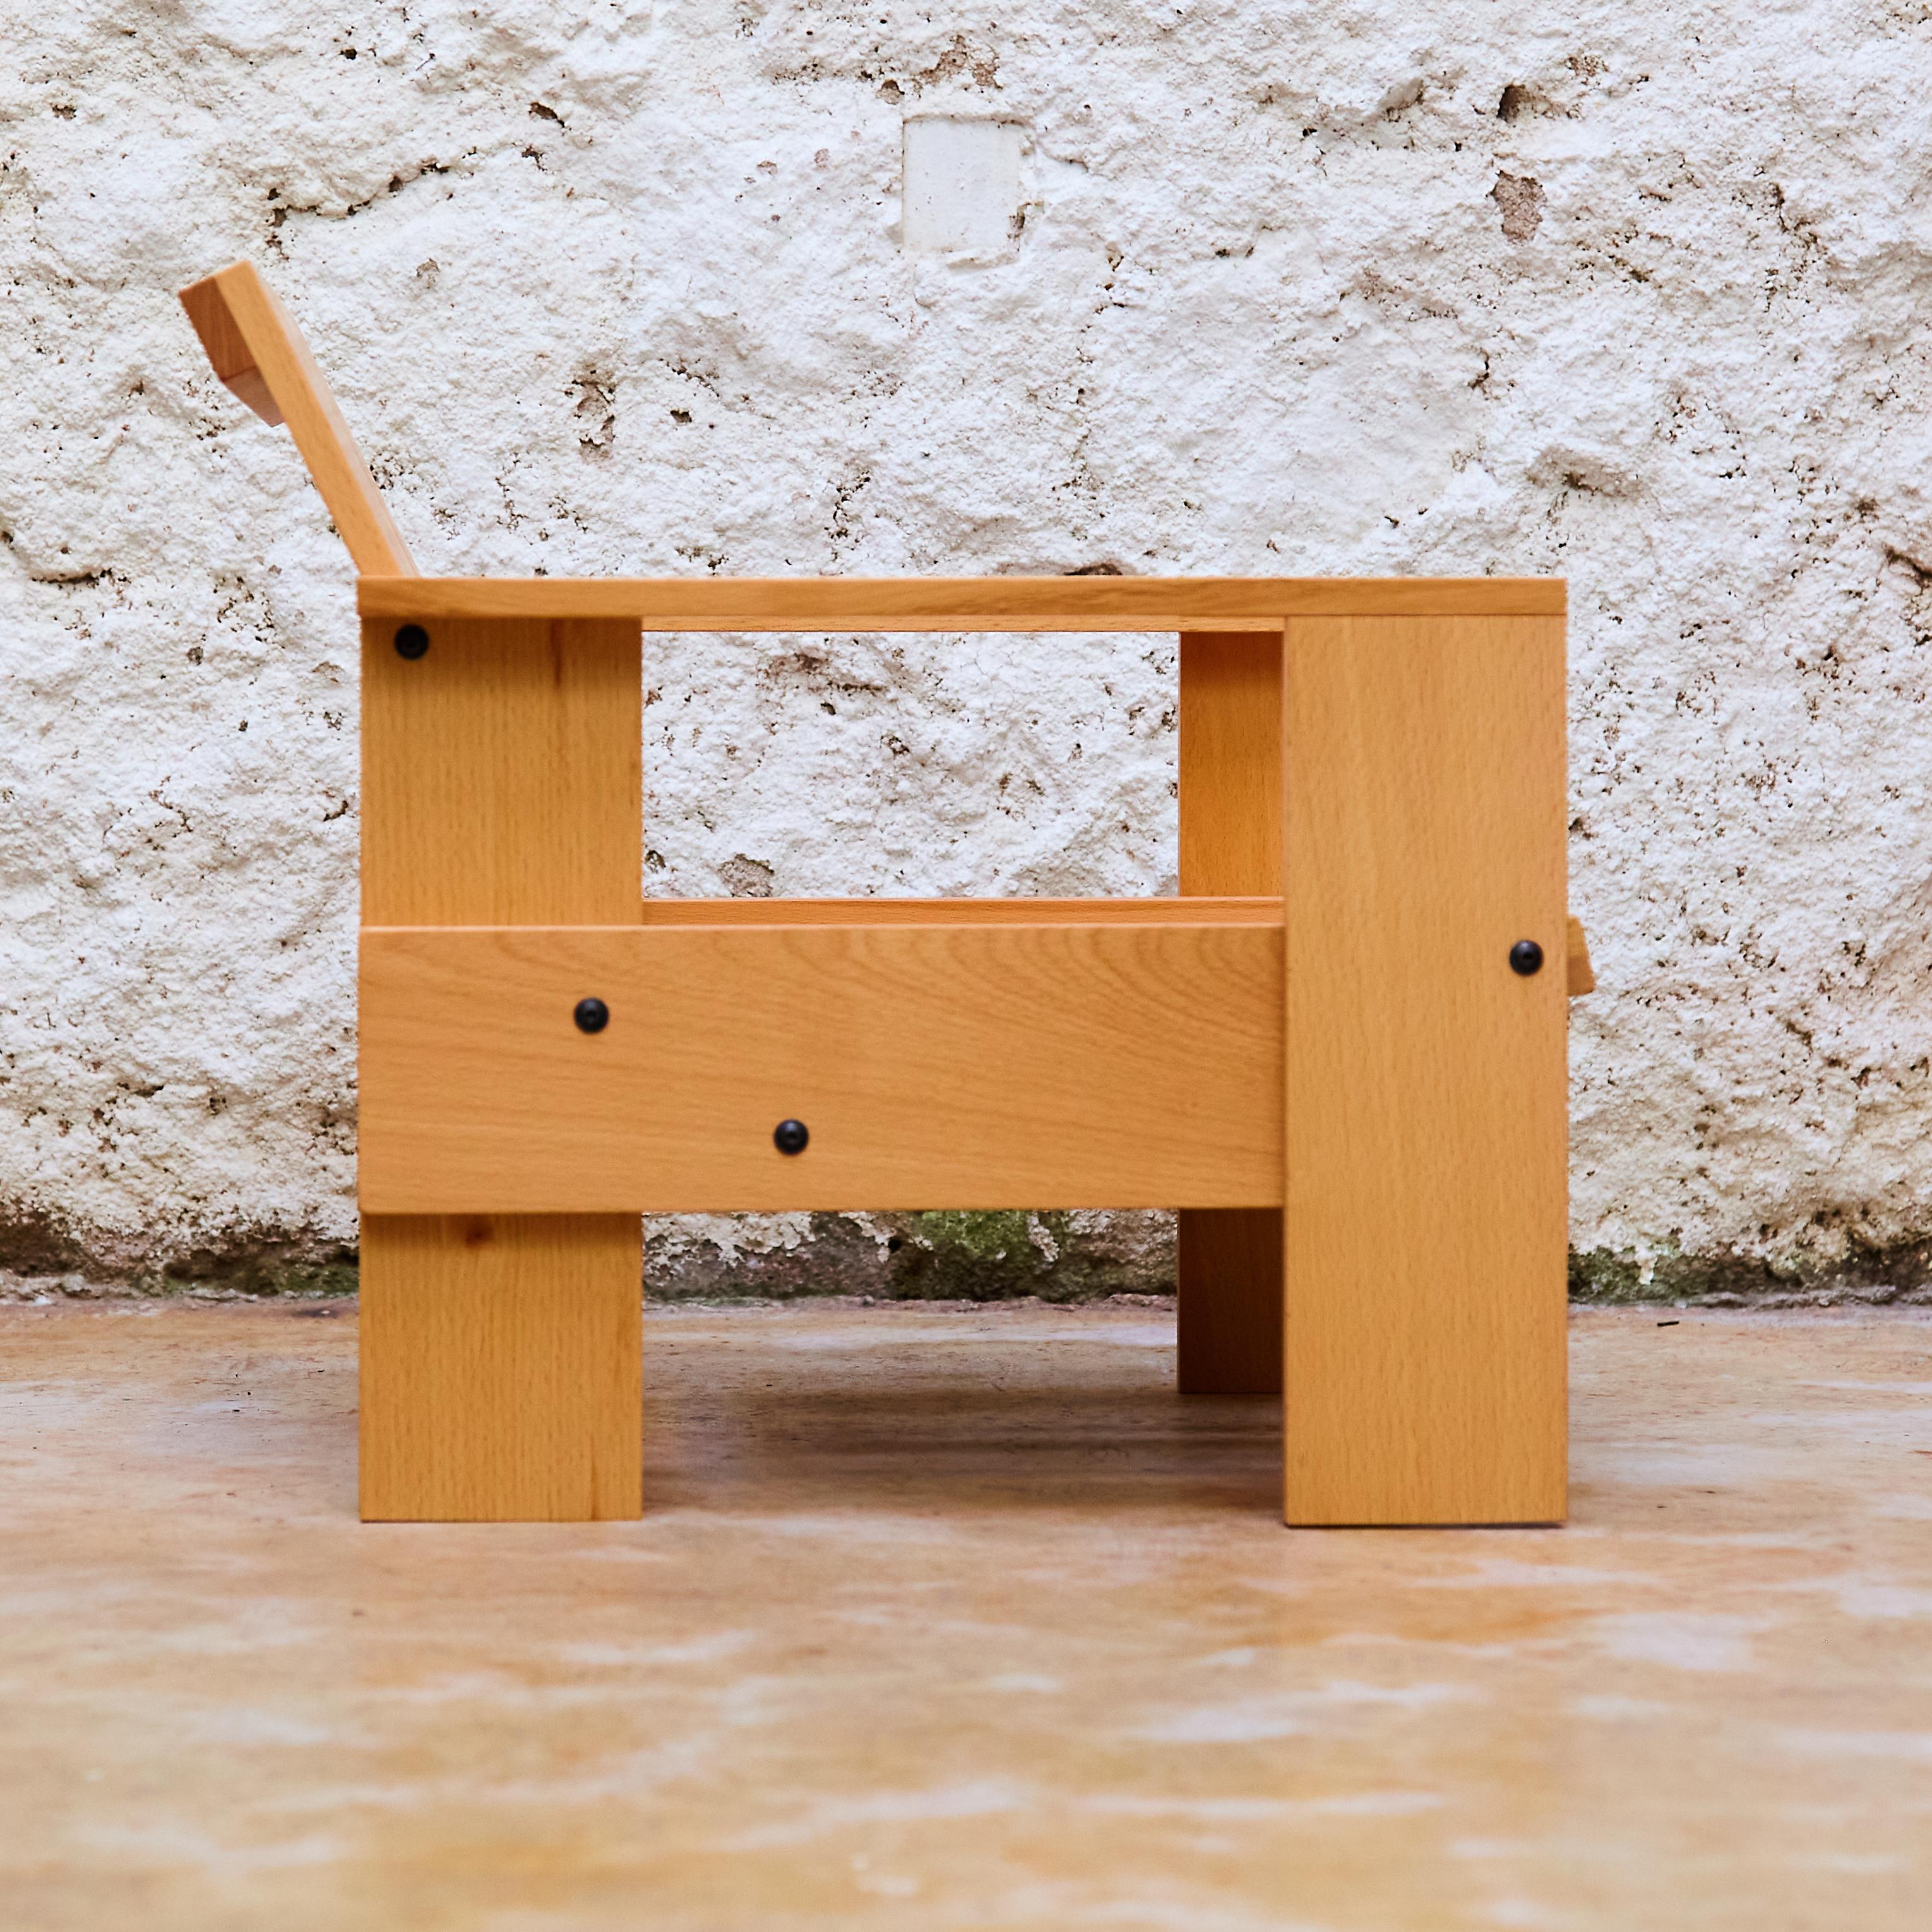 Dutch Gerrit Rietveld Wood Child Armchair 'Crate' by Rietveld by Rietveld, circa 2005 For Sale